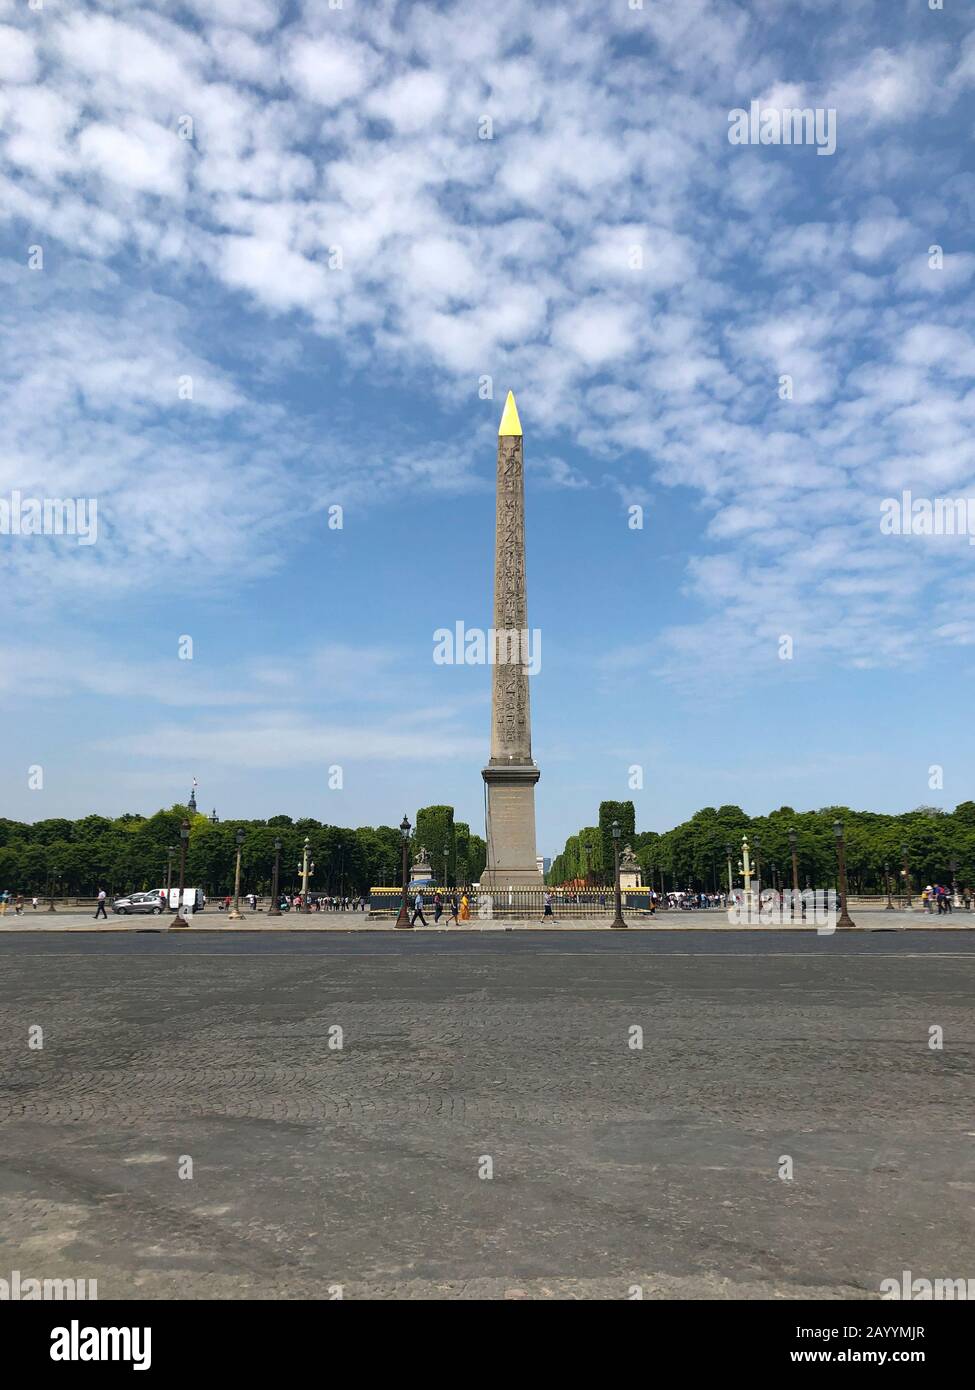 Egyptian Obelisk of Luxor Standing at the Center of the Place de la Concorde in Paris, France Stock Photo